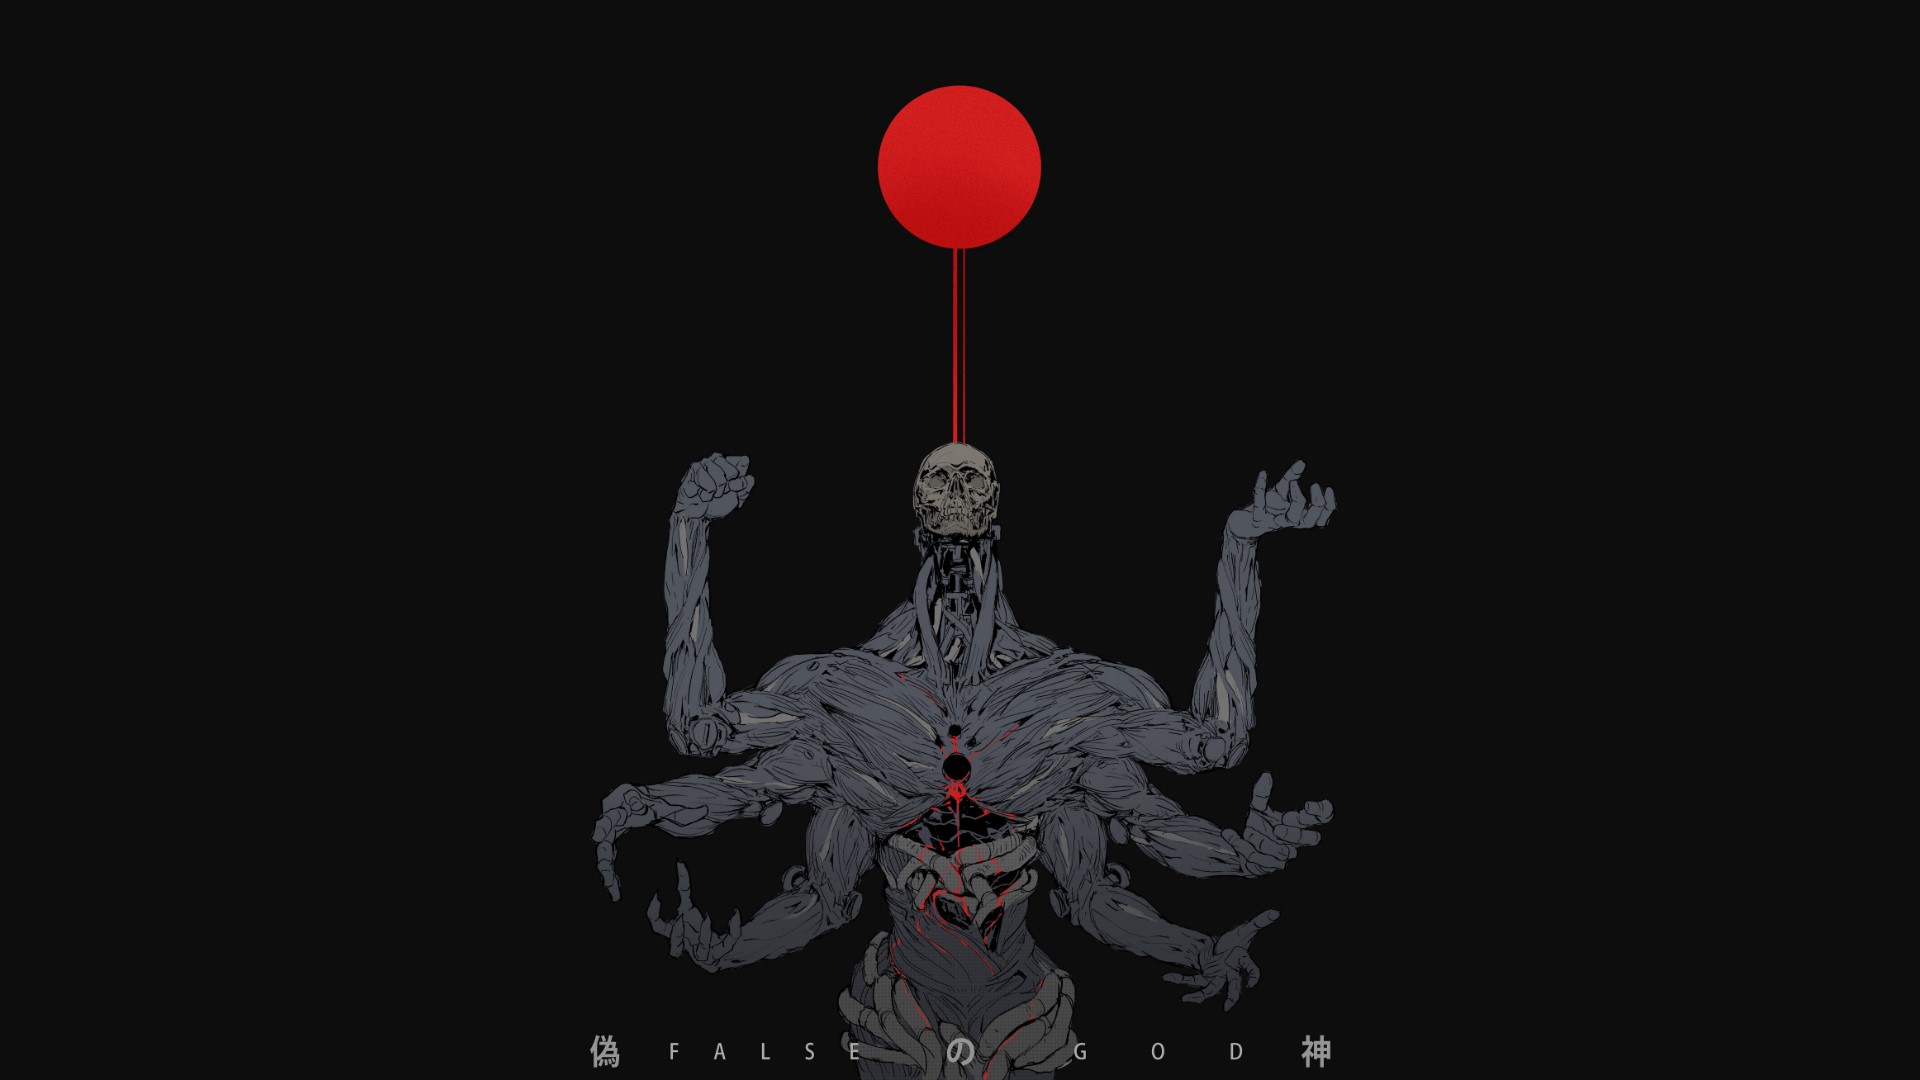 General 1920x1080 skull black background God blood occult Ching Yeh minimalism simple background giant digital art frontal view red sun fantasy art muscles artwork